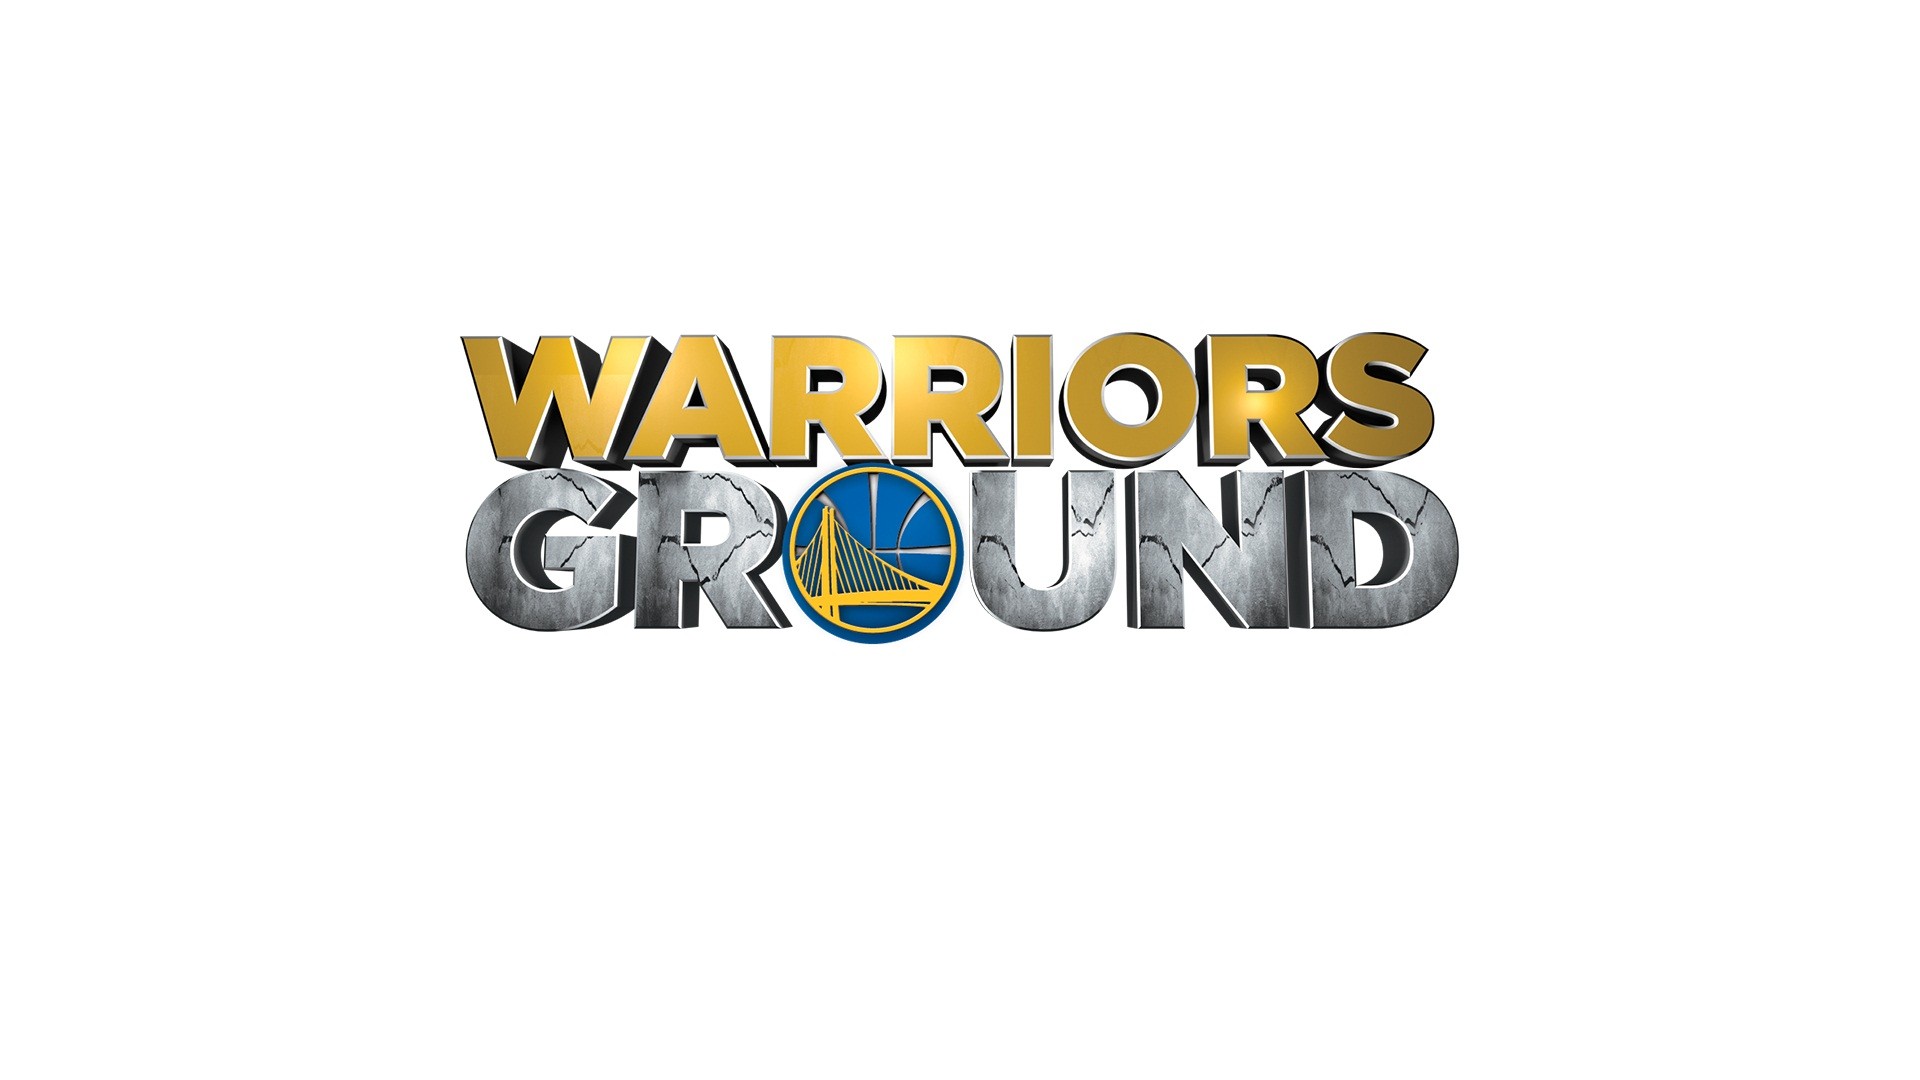 Backgrounds Golden State Warriors Logo HD with image dimensions 1920x1080 pixel. You can make this wallpaper for your Desktop Computer Backgrounds, Windows or Mac Screensavers, iPhone Lock screen, Tablet or Android and another Mobile Phone device